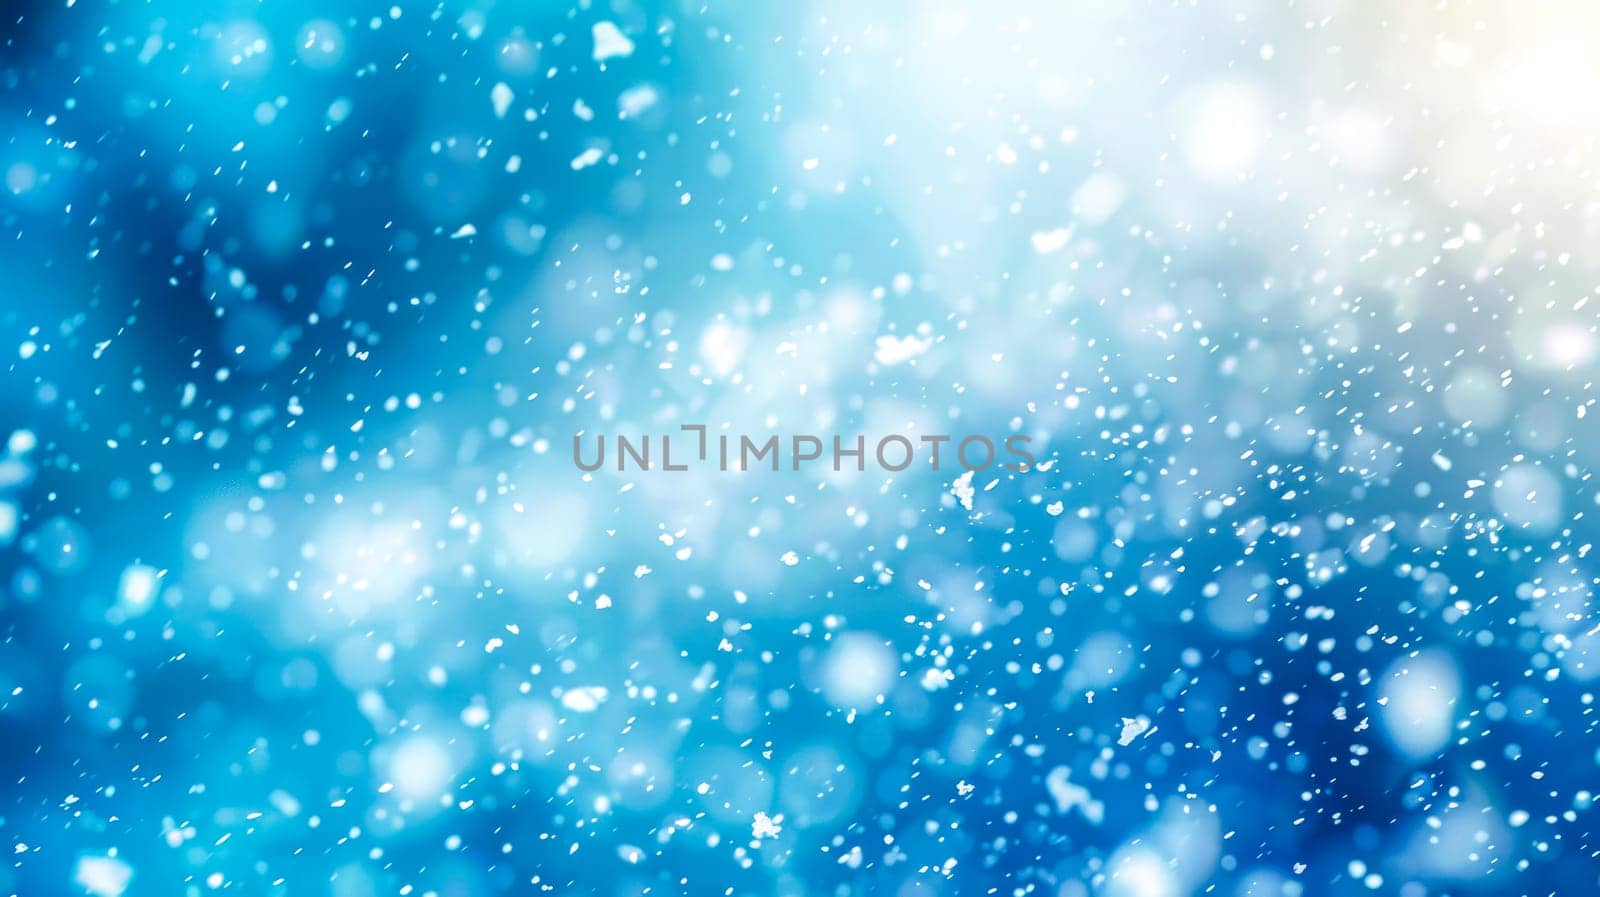 Abstract blue winter background with soft-focused snowflakes and bokeh lights by Edophoto